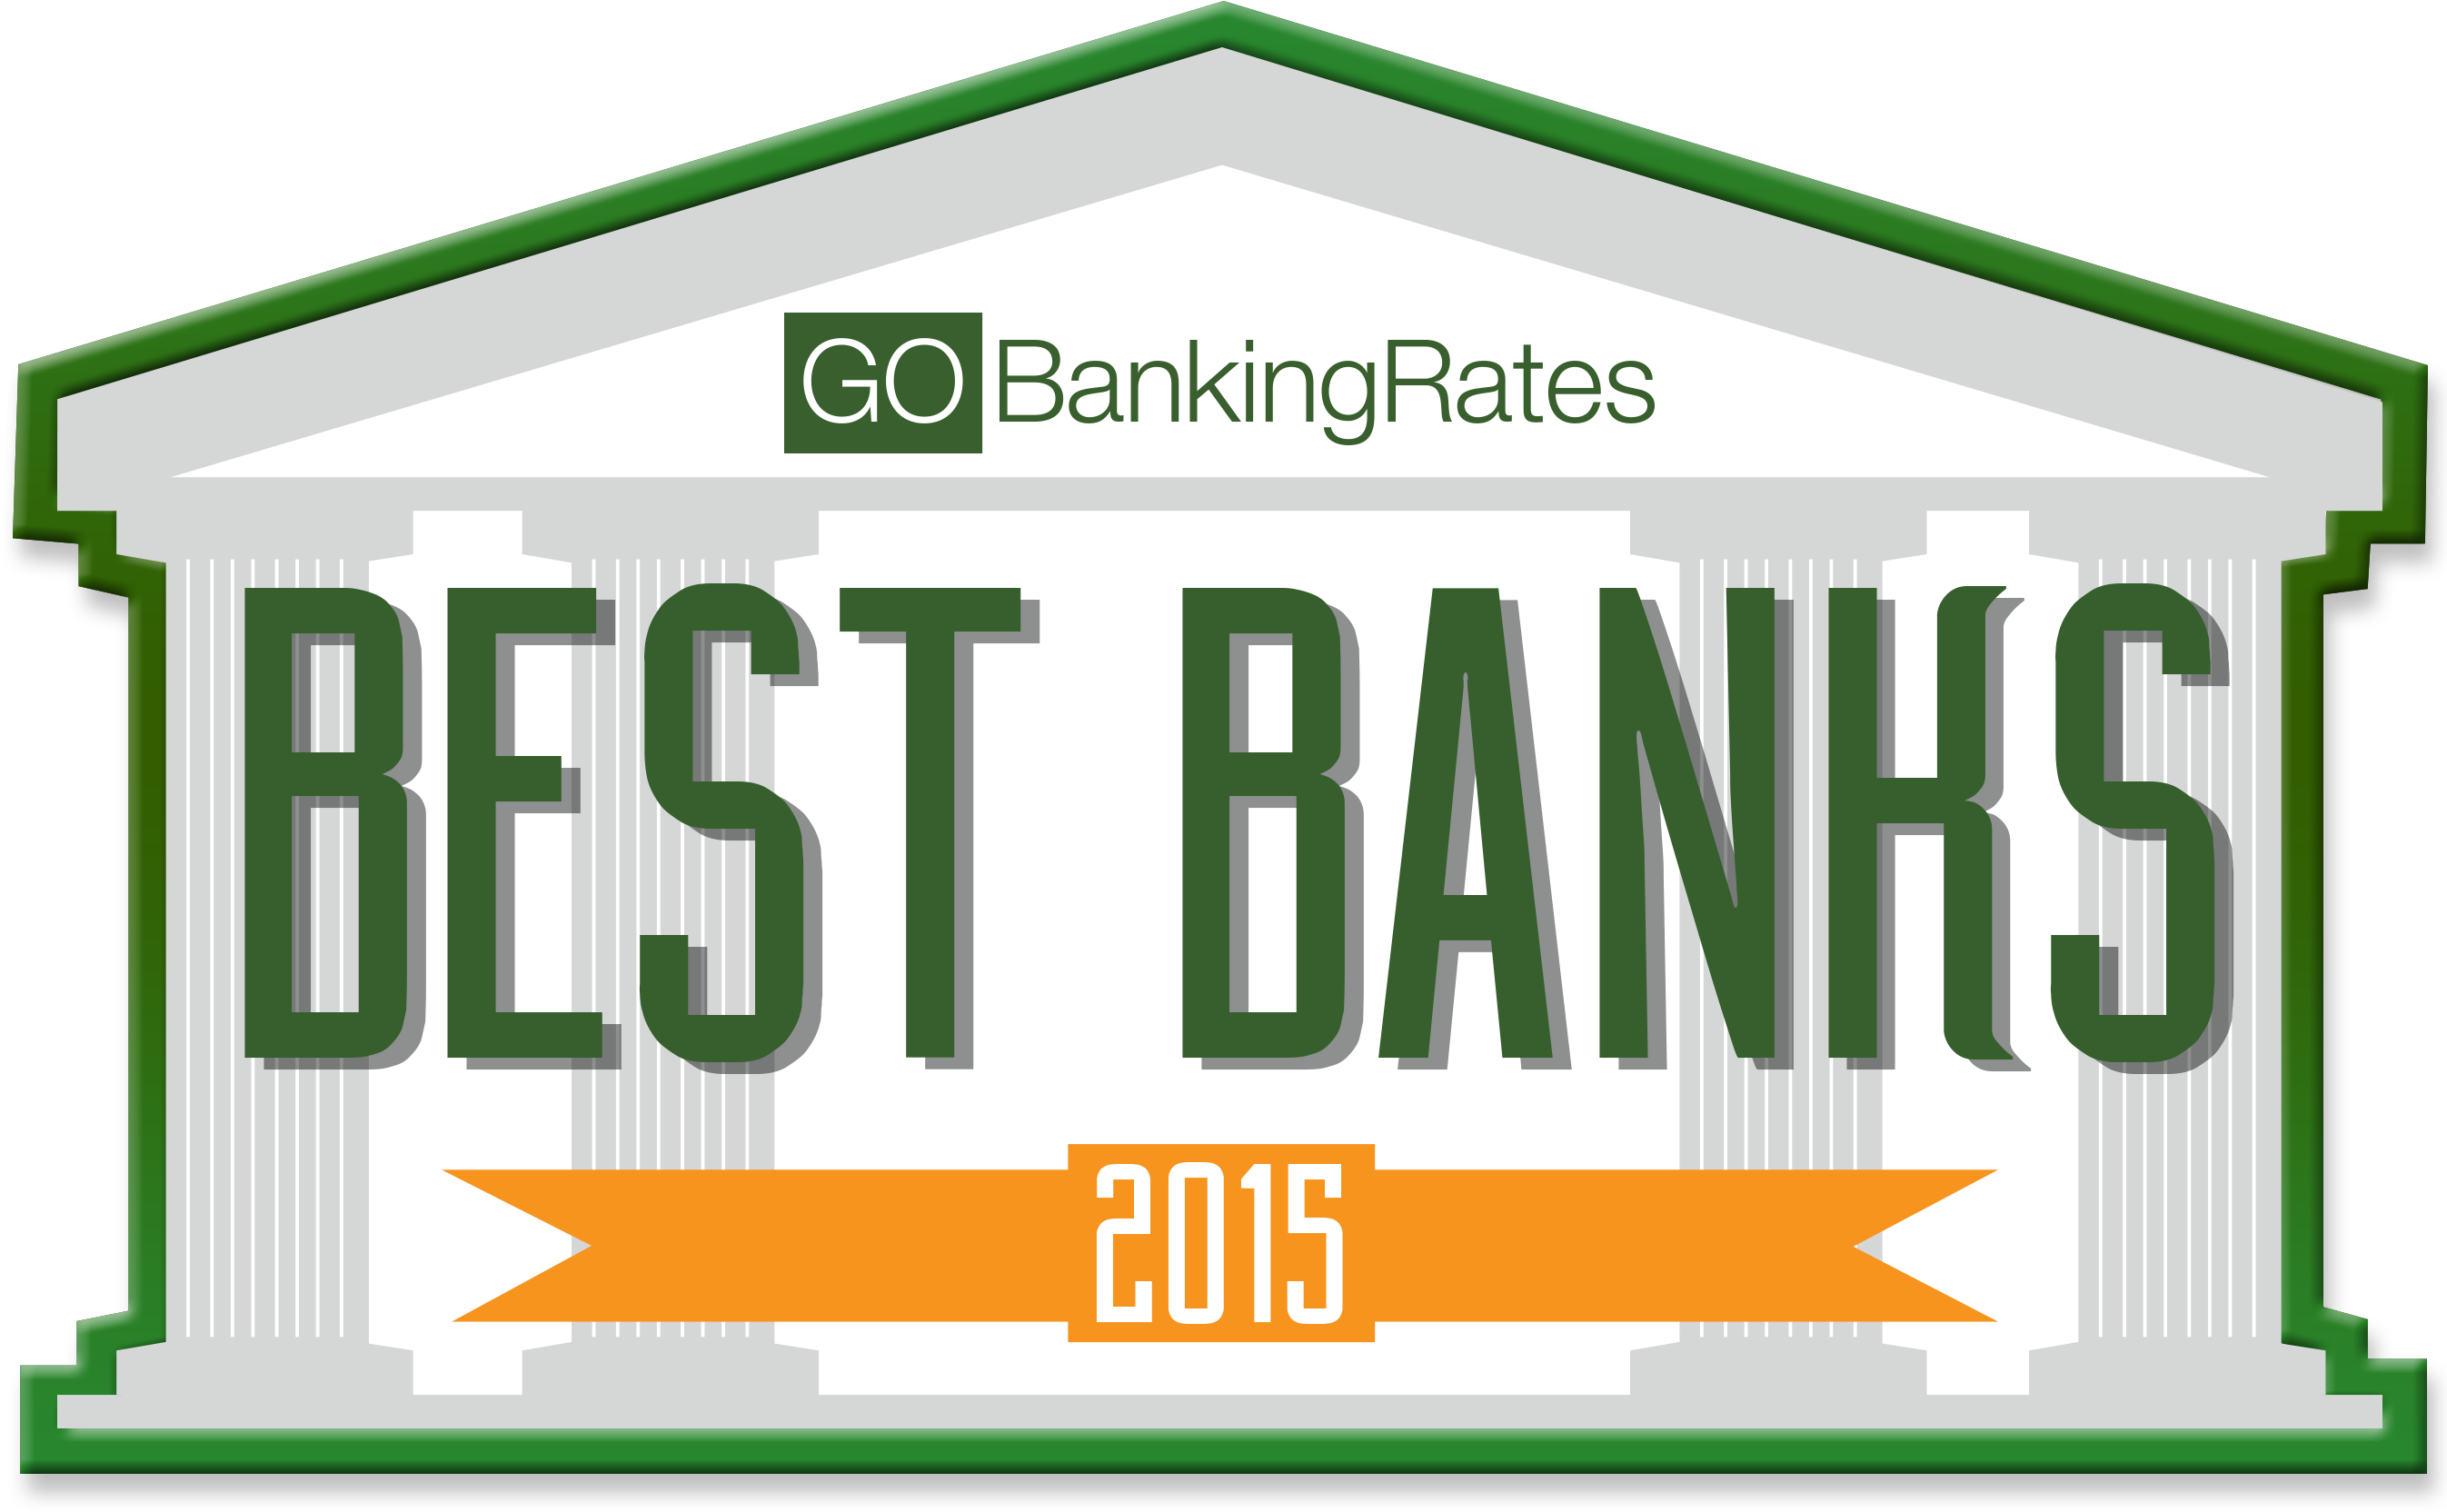 We Ranked All The Best Banks For - Best Bank (2700x1976)